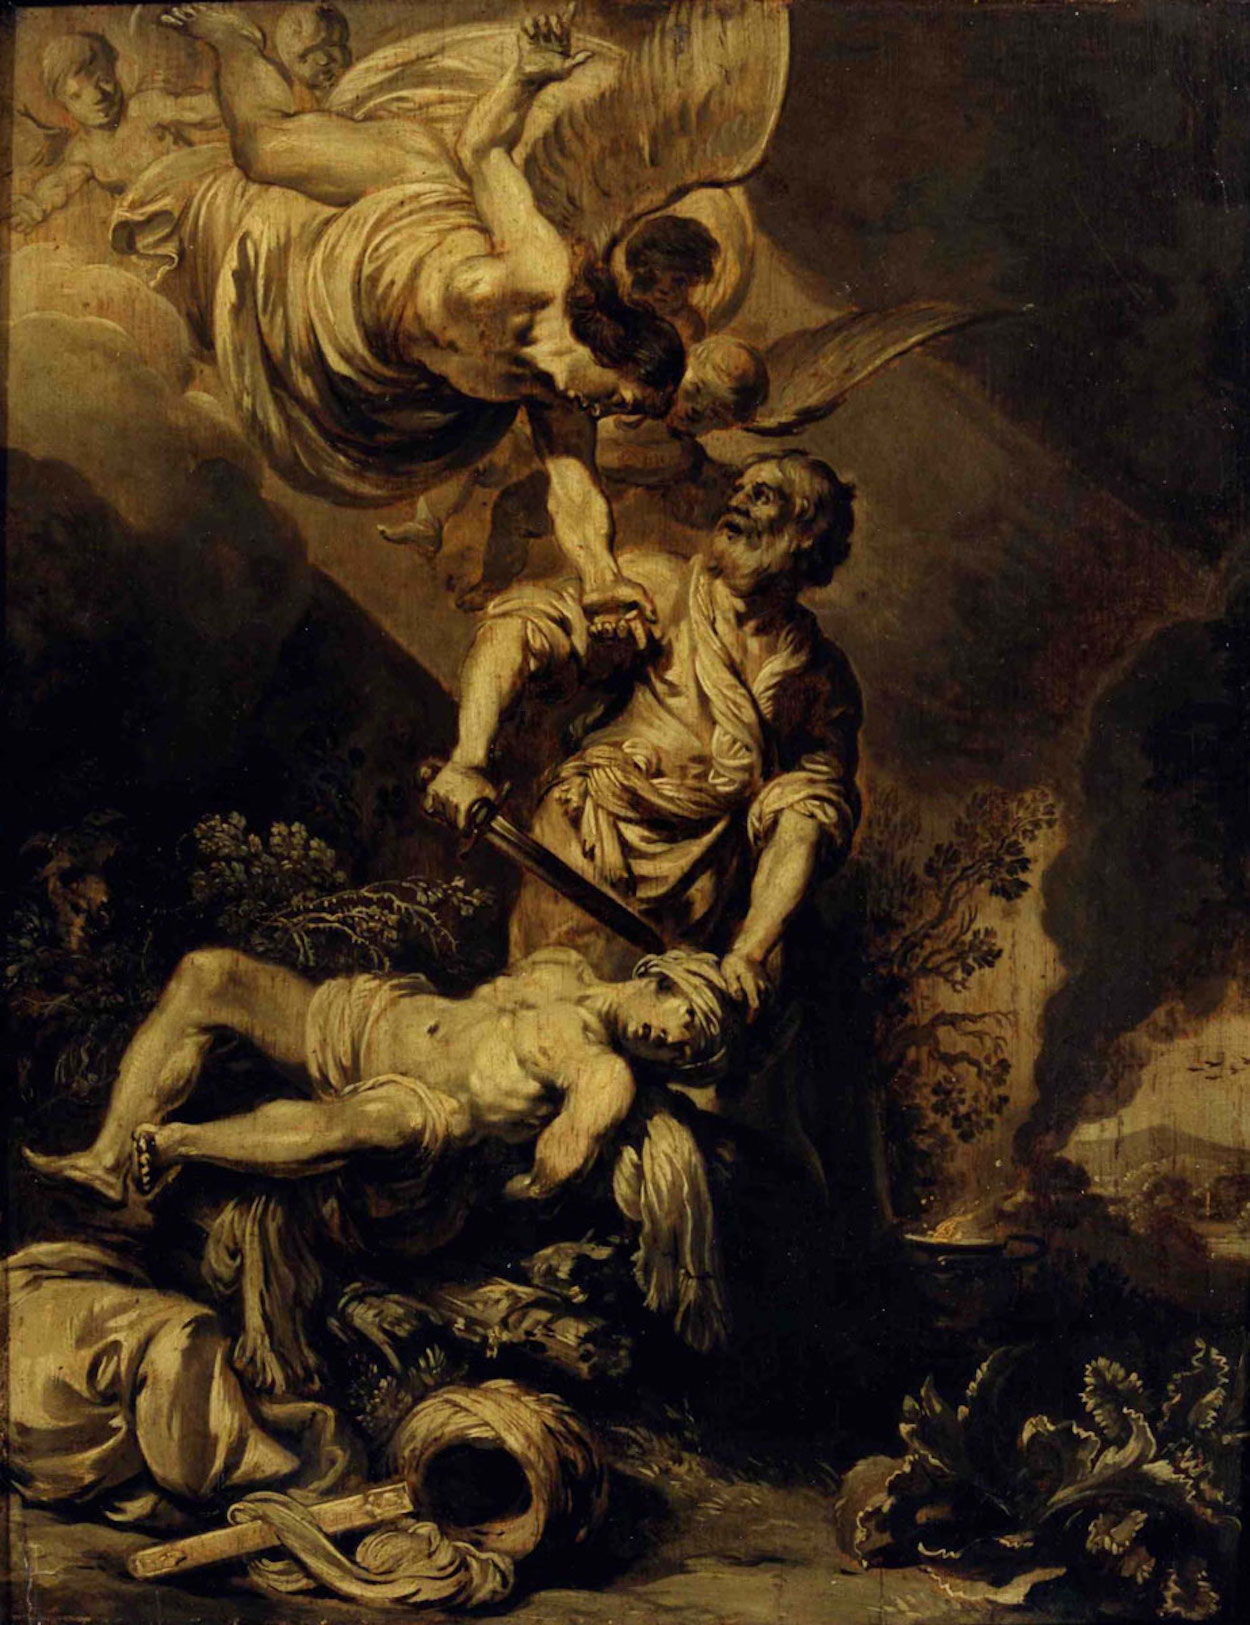 The Sacrifice of Abraham by Pieter Lastman - c. 1612 Rembrandthuis